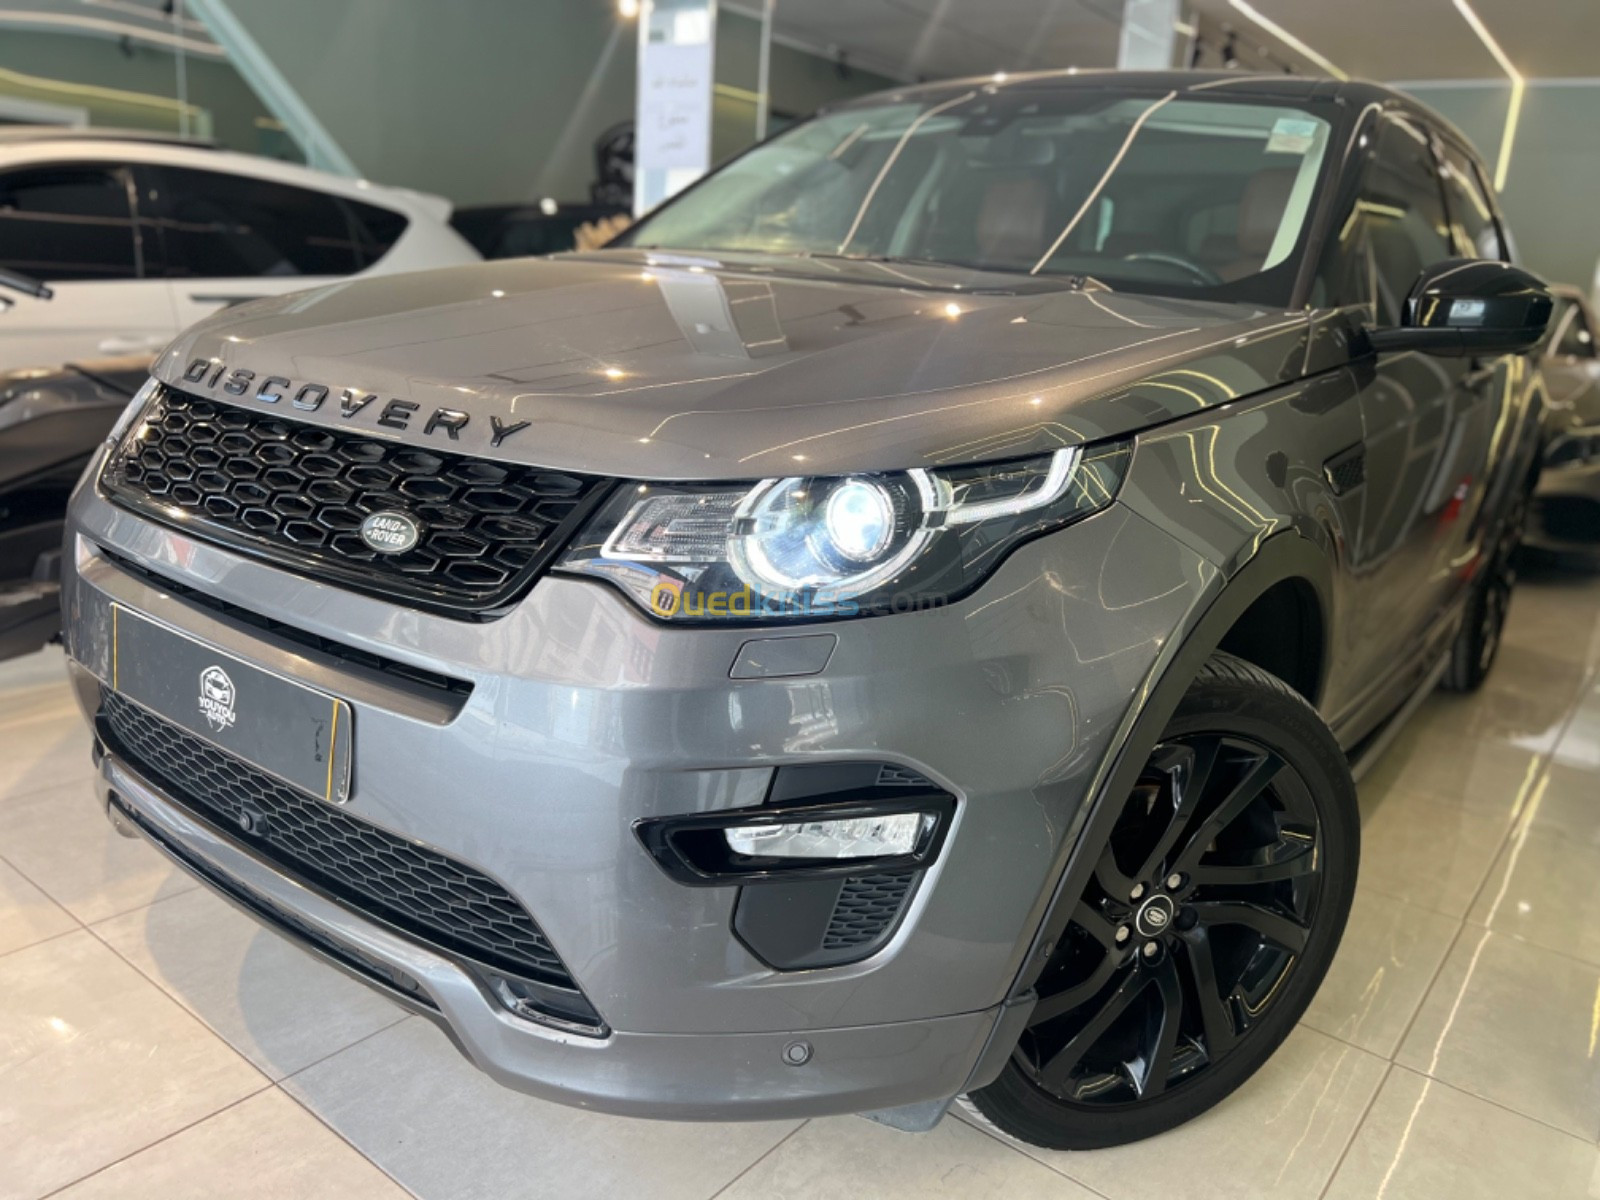 Land Rover Discovery 2018 Discovery